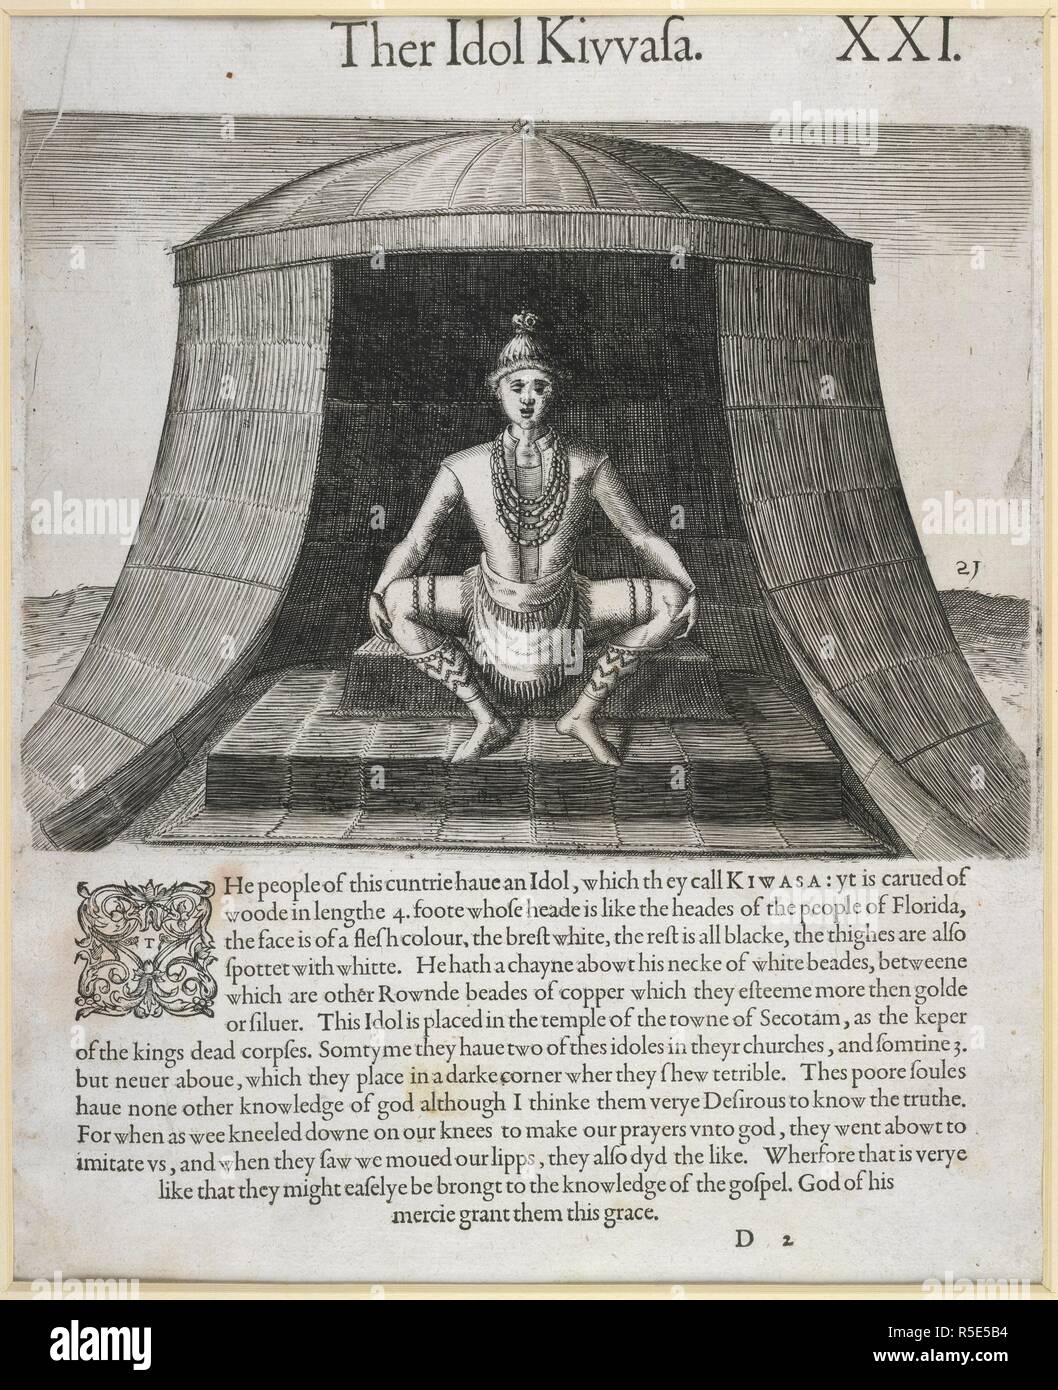 'The idol Kivvasa (Kiwasa)'. The idol is four feet high, and kept in the temple of the town of Secota, as the guardian of the royal corpses. [America.-Part I.-English.] A briefe and true report of the new found land of Virginia, of the commodities and of the nature and manners of the naturall inhabitants. Discouered by the English Colony there seated by Sir R. Greinuile In 1585 This fore booke is made in English by Thomas Hariot. Frankfurt, 1590. Source: C.38.i.18, plate 21 page 30. Language: English. Stock Photo